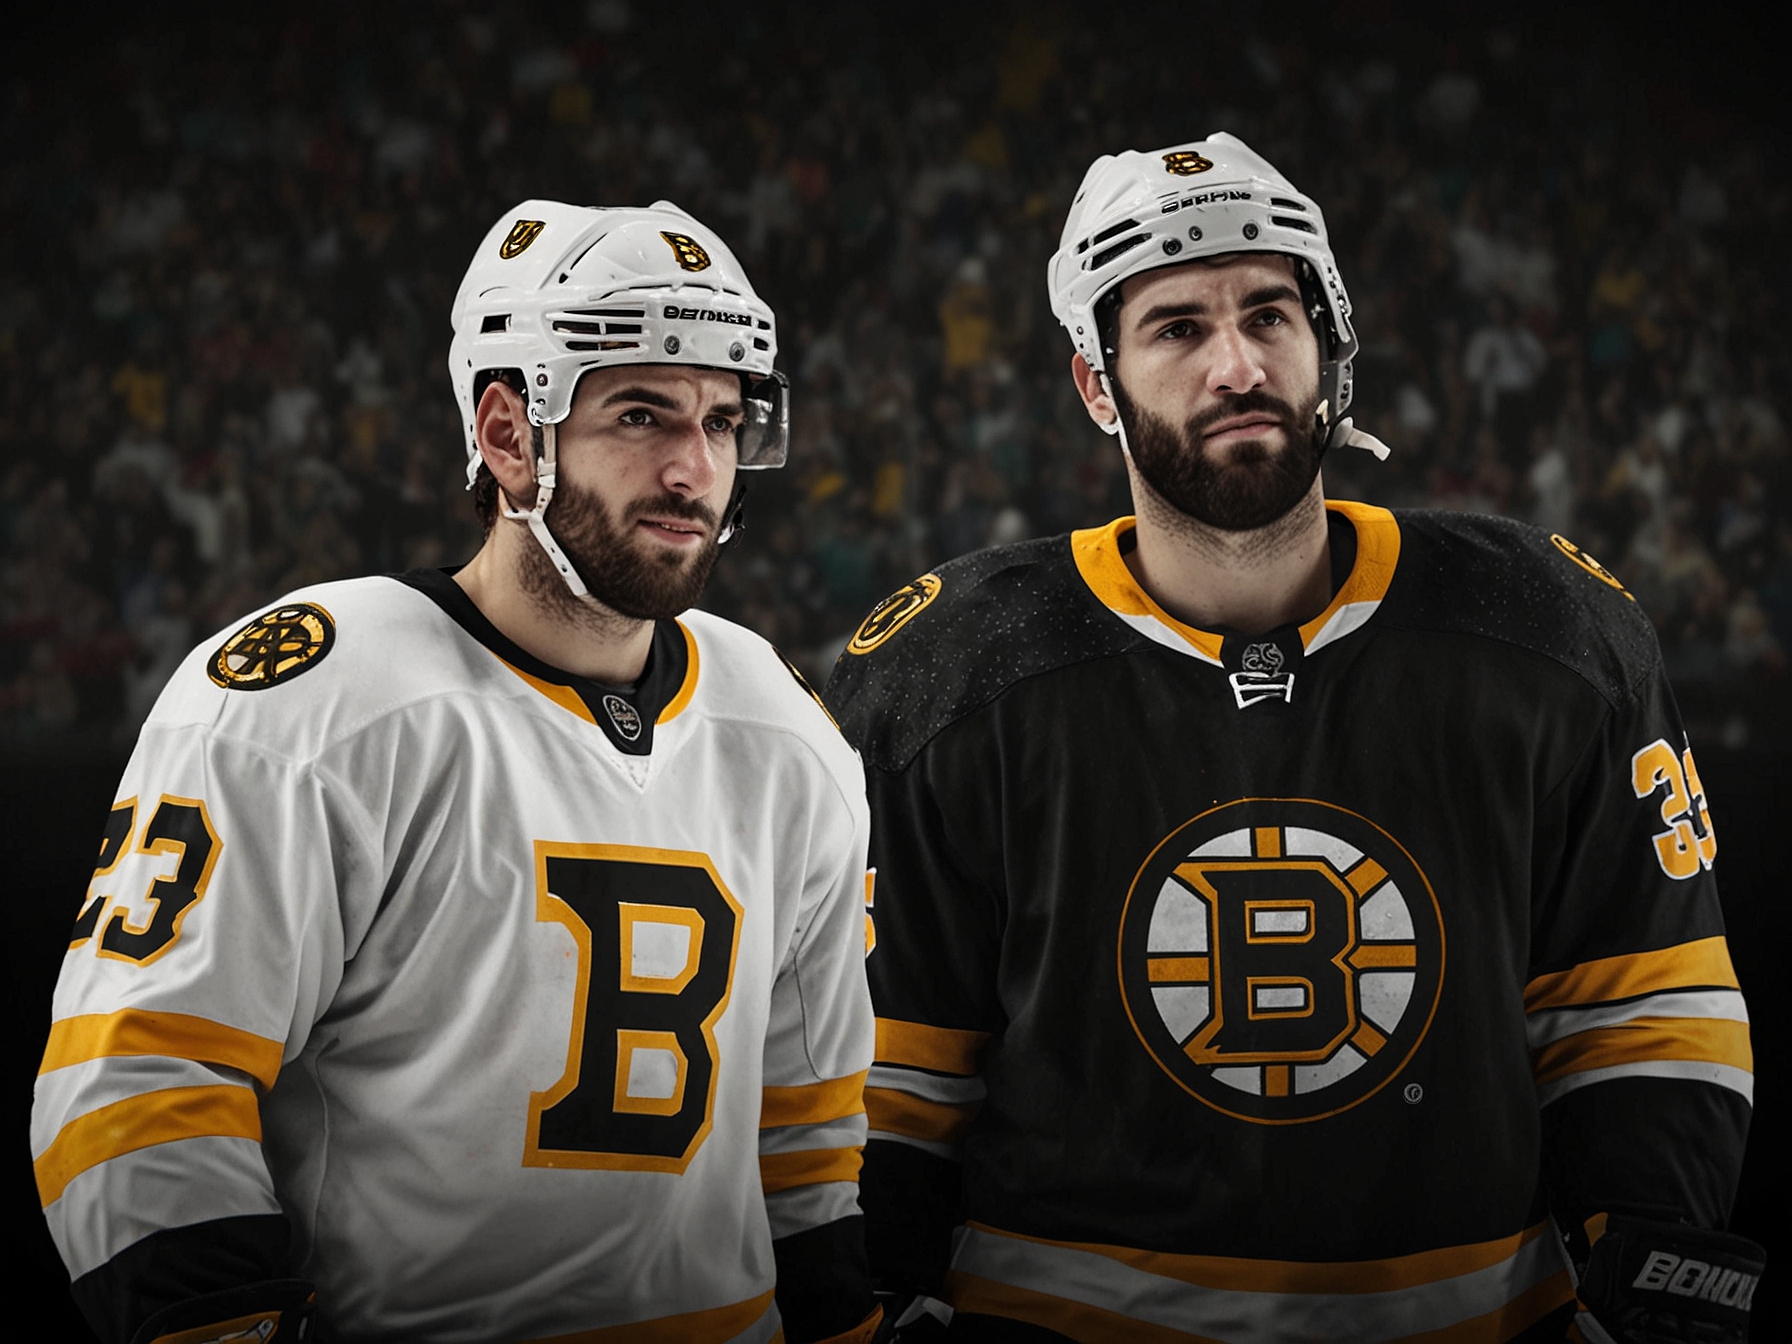 A graphic showing important Boston Bruins players like Patrice Bergeron and David Krejci with contract negotiation icons to represent offseason priorities.